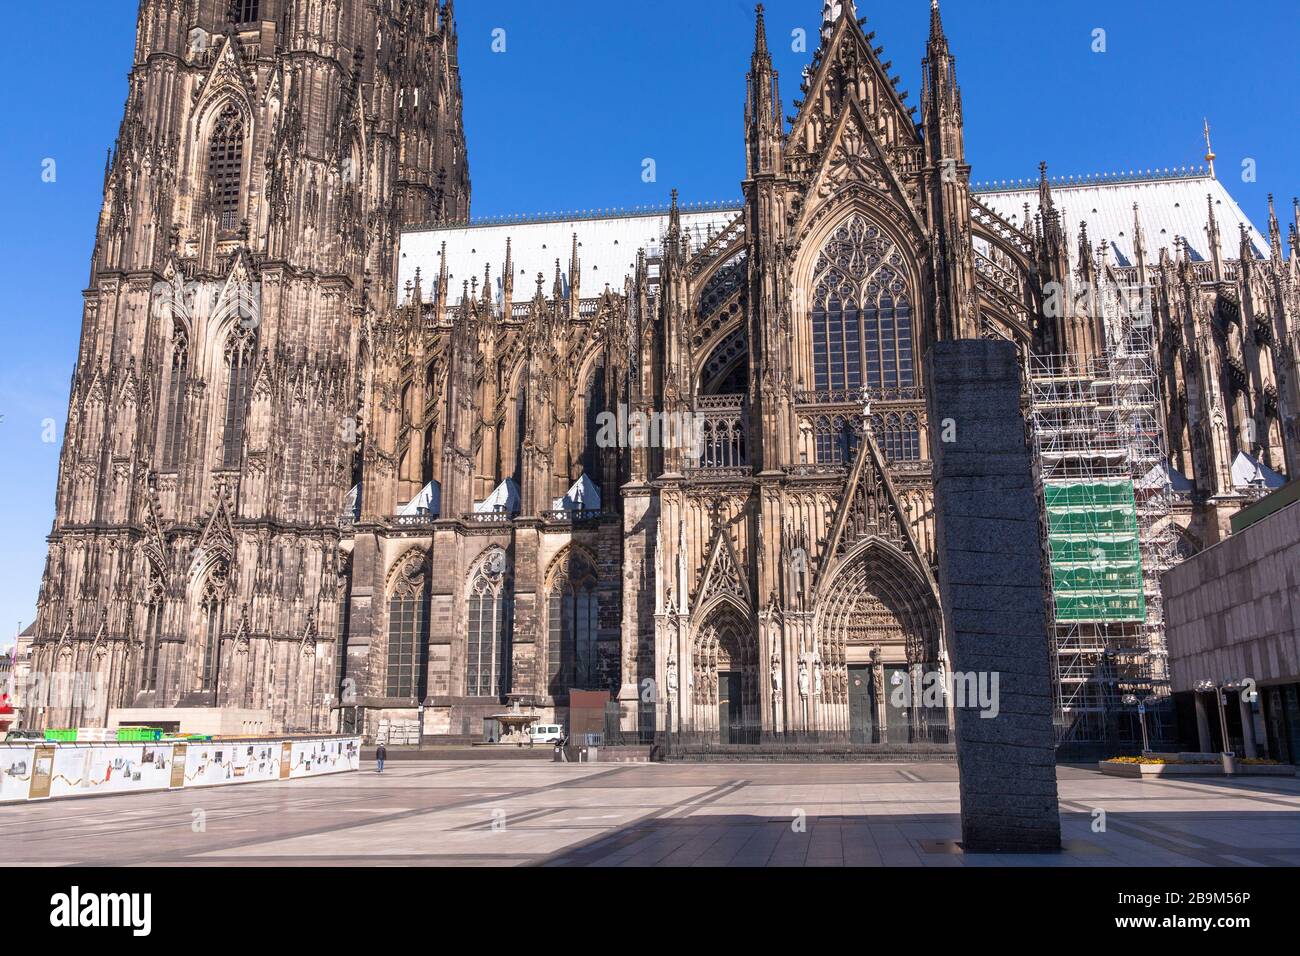 Coronavirus / Covid 19 outbreak, March 24th. 2020. The almost deserted square around Cologne Cathedral, usually visited by thousands of people, Cologn Stock Photo